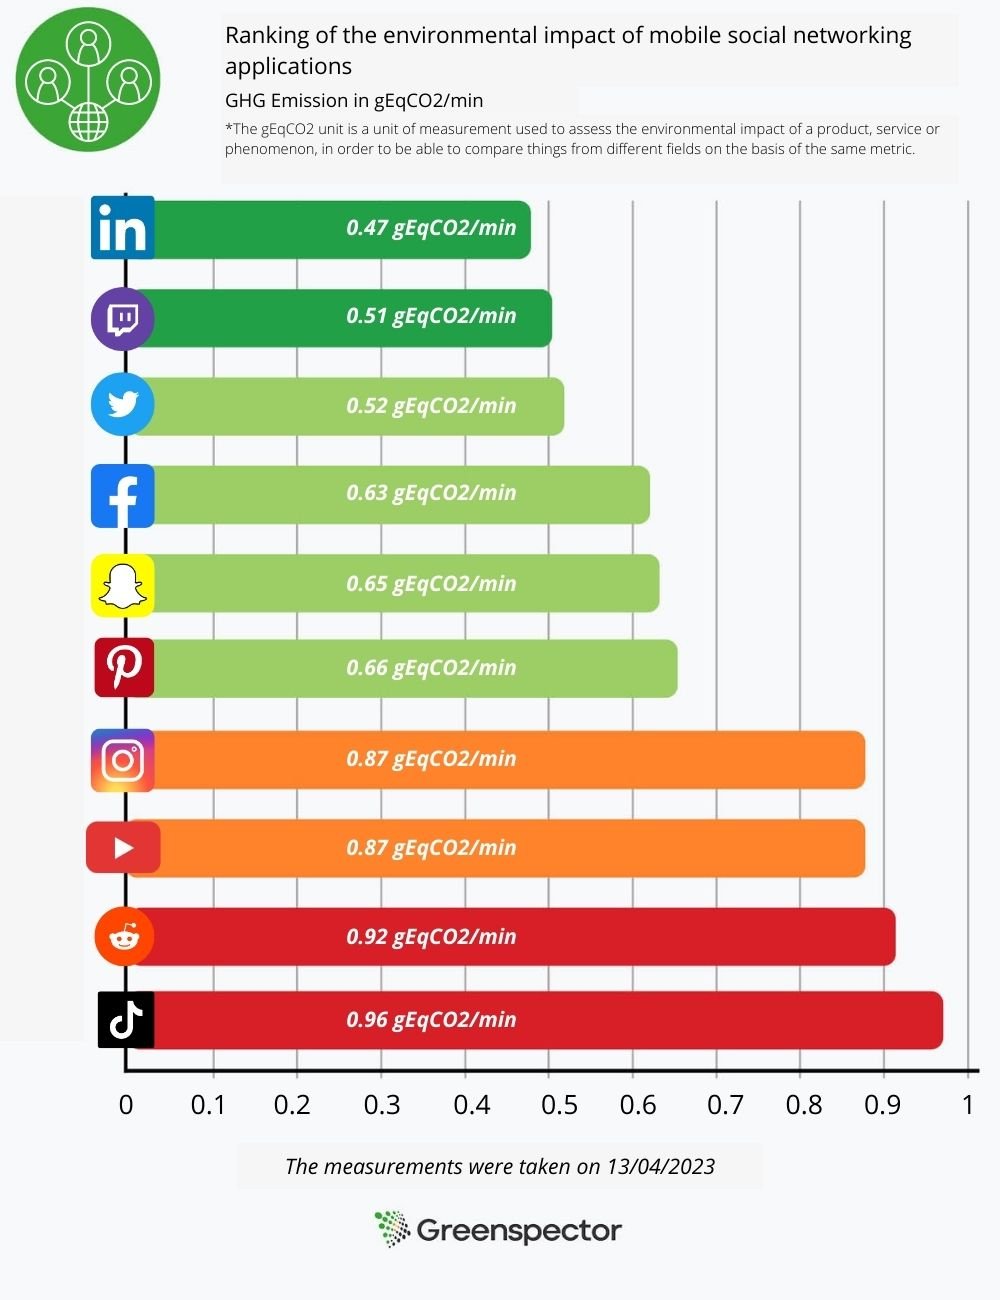 Ranking of the environmental impact of mobile social networking applications
1 - linkedIn :0.47gEqCO2/min
2- twitch : 0.51 gEqCO2/min
3- Twitter : 0.52 gEqCO2/min
4- Facebook: 0.63 gEqCO2/min
5- Snapchat: 0.65 gEqCO2/min
6- Pinterest: 0.66 gEqCO2/min
7- Instagram: 0.87 gEqCO2/min
8- Youtube: 0.87 gEqCO2/min
9- Reddit: 0.92 gEqCO2/min
10 - Tiktok: 0.96 gEqCO2/min
The measurements were taken by Greenspector on 13/04/2023
